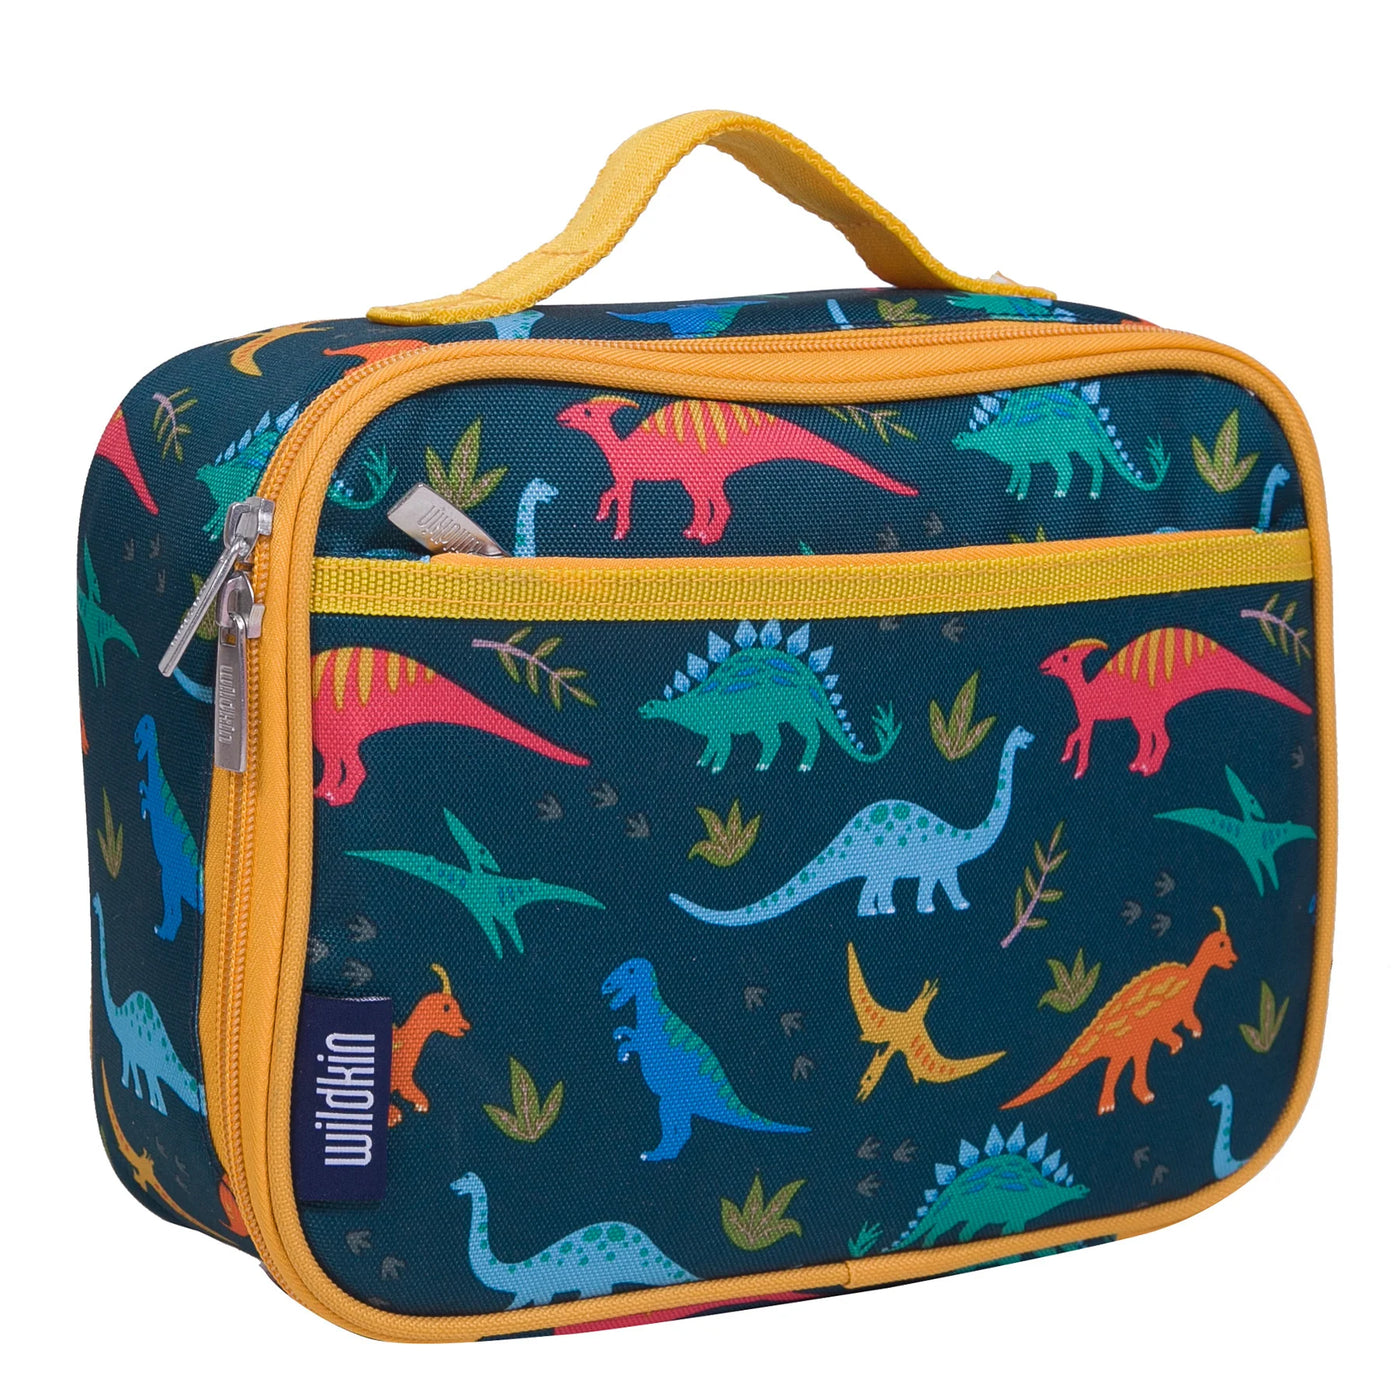 Wildkin Lunch Box + More Options